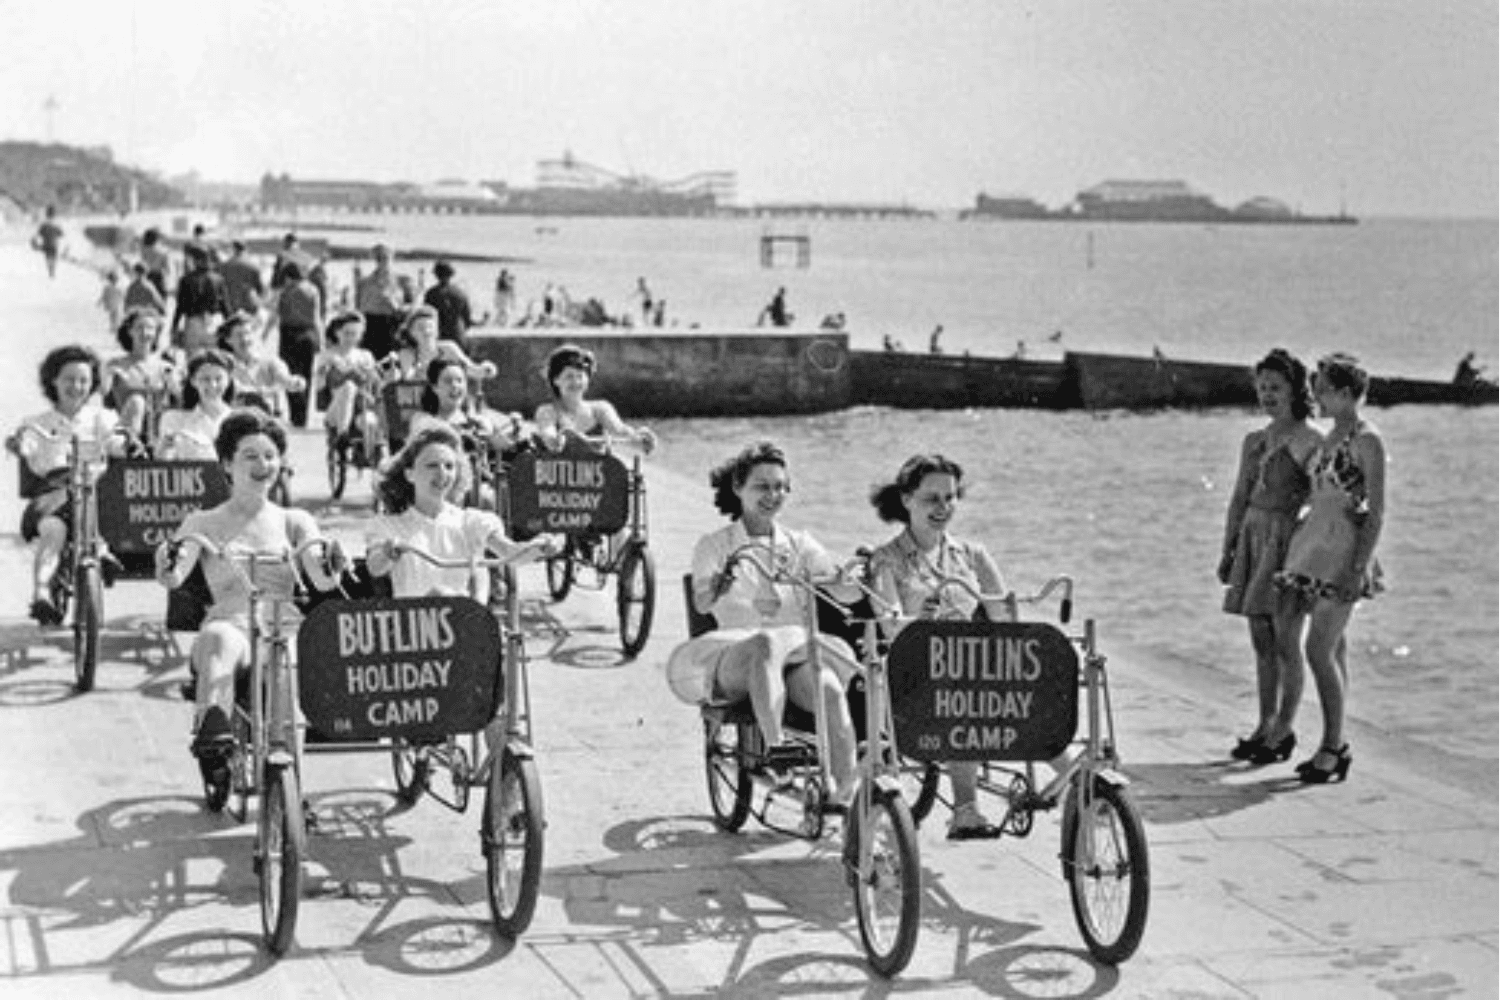 Nostalgia photo of people heading to 'butlins holiday camp'